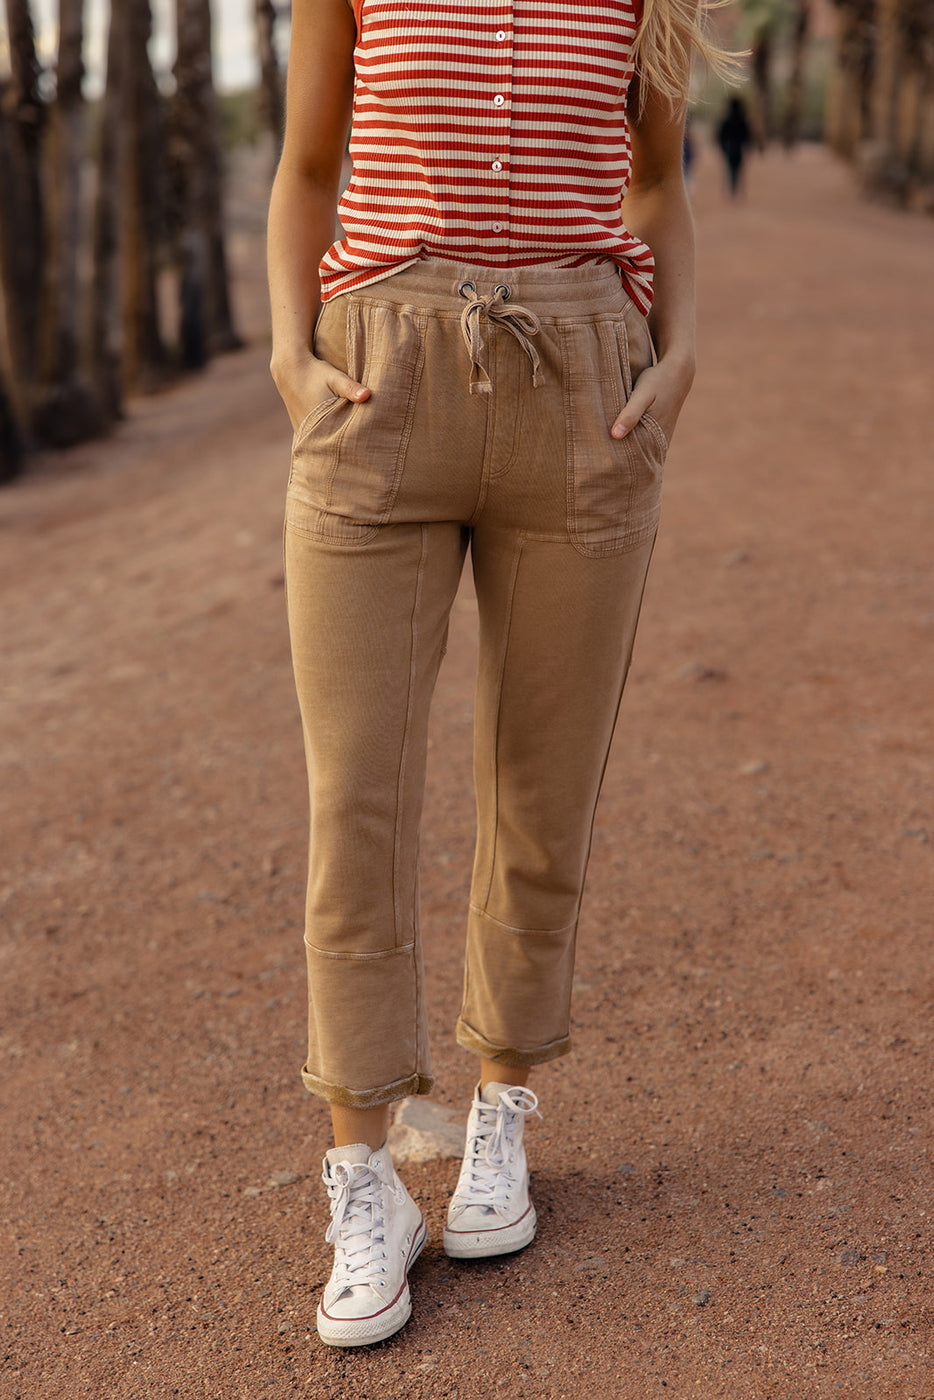 a person wearing tan pants and white shoes